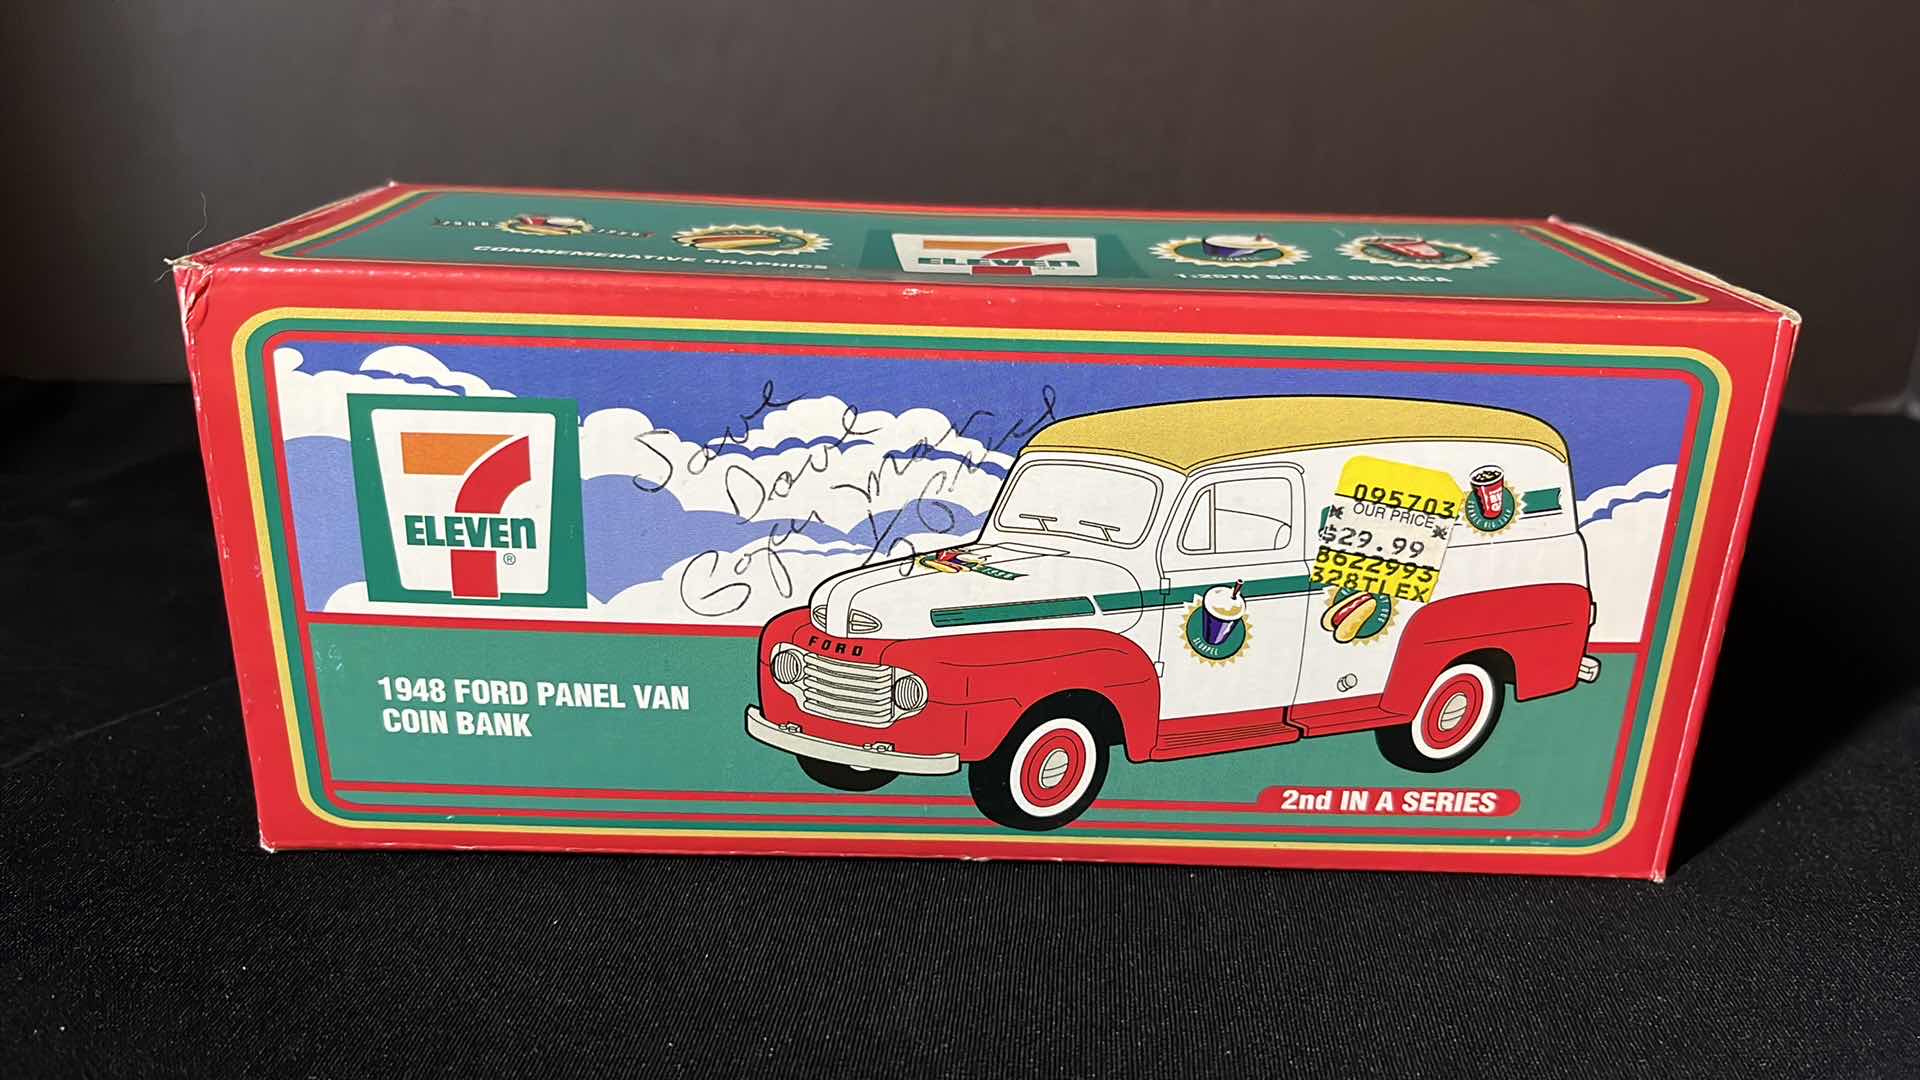 Photo 1 of VINTAGE FORD MOTOR COMPANY 7 ELEVEN 1948 FORD PANEL VAN COIN BANK (STOCK #68036)